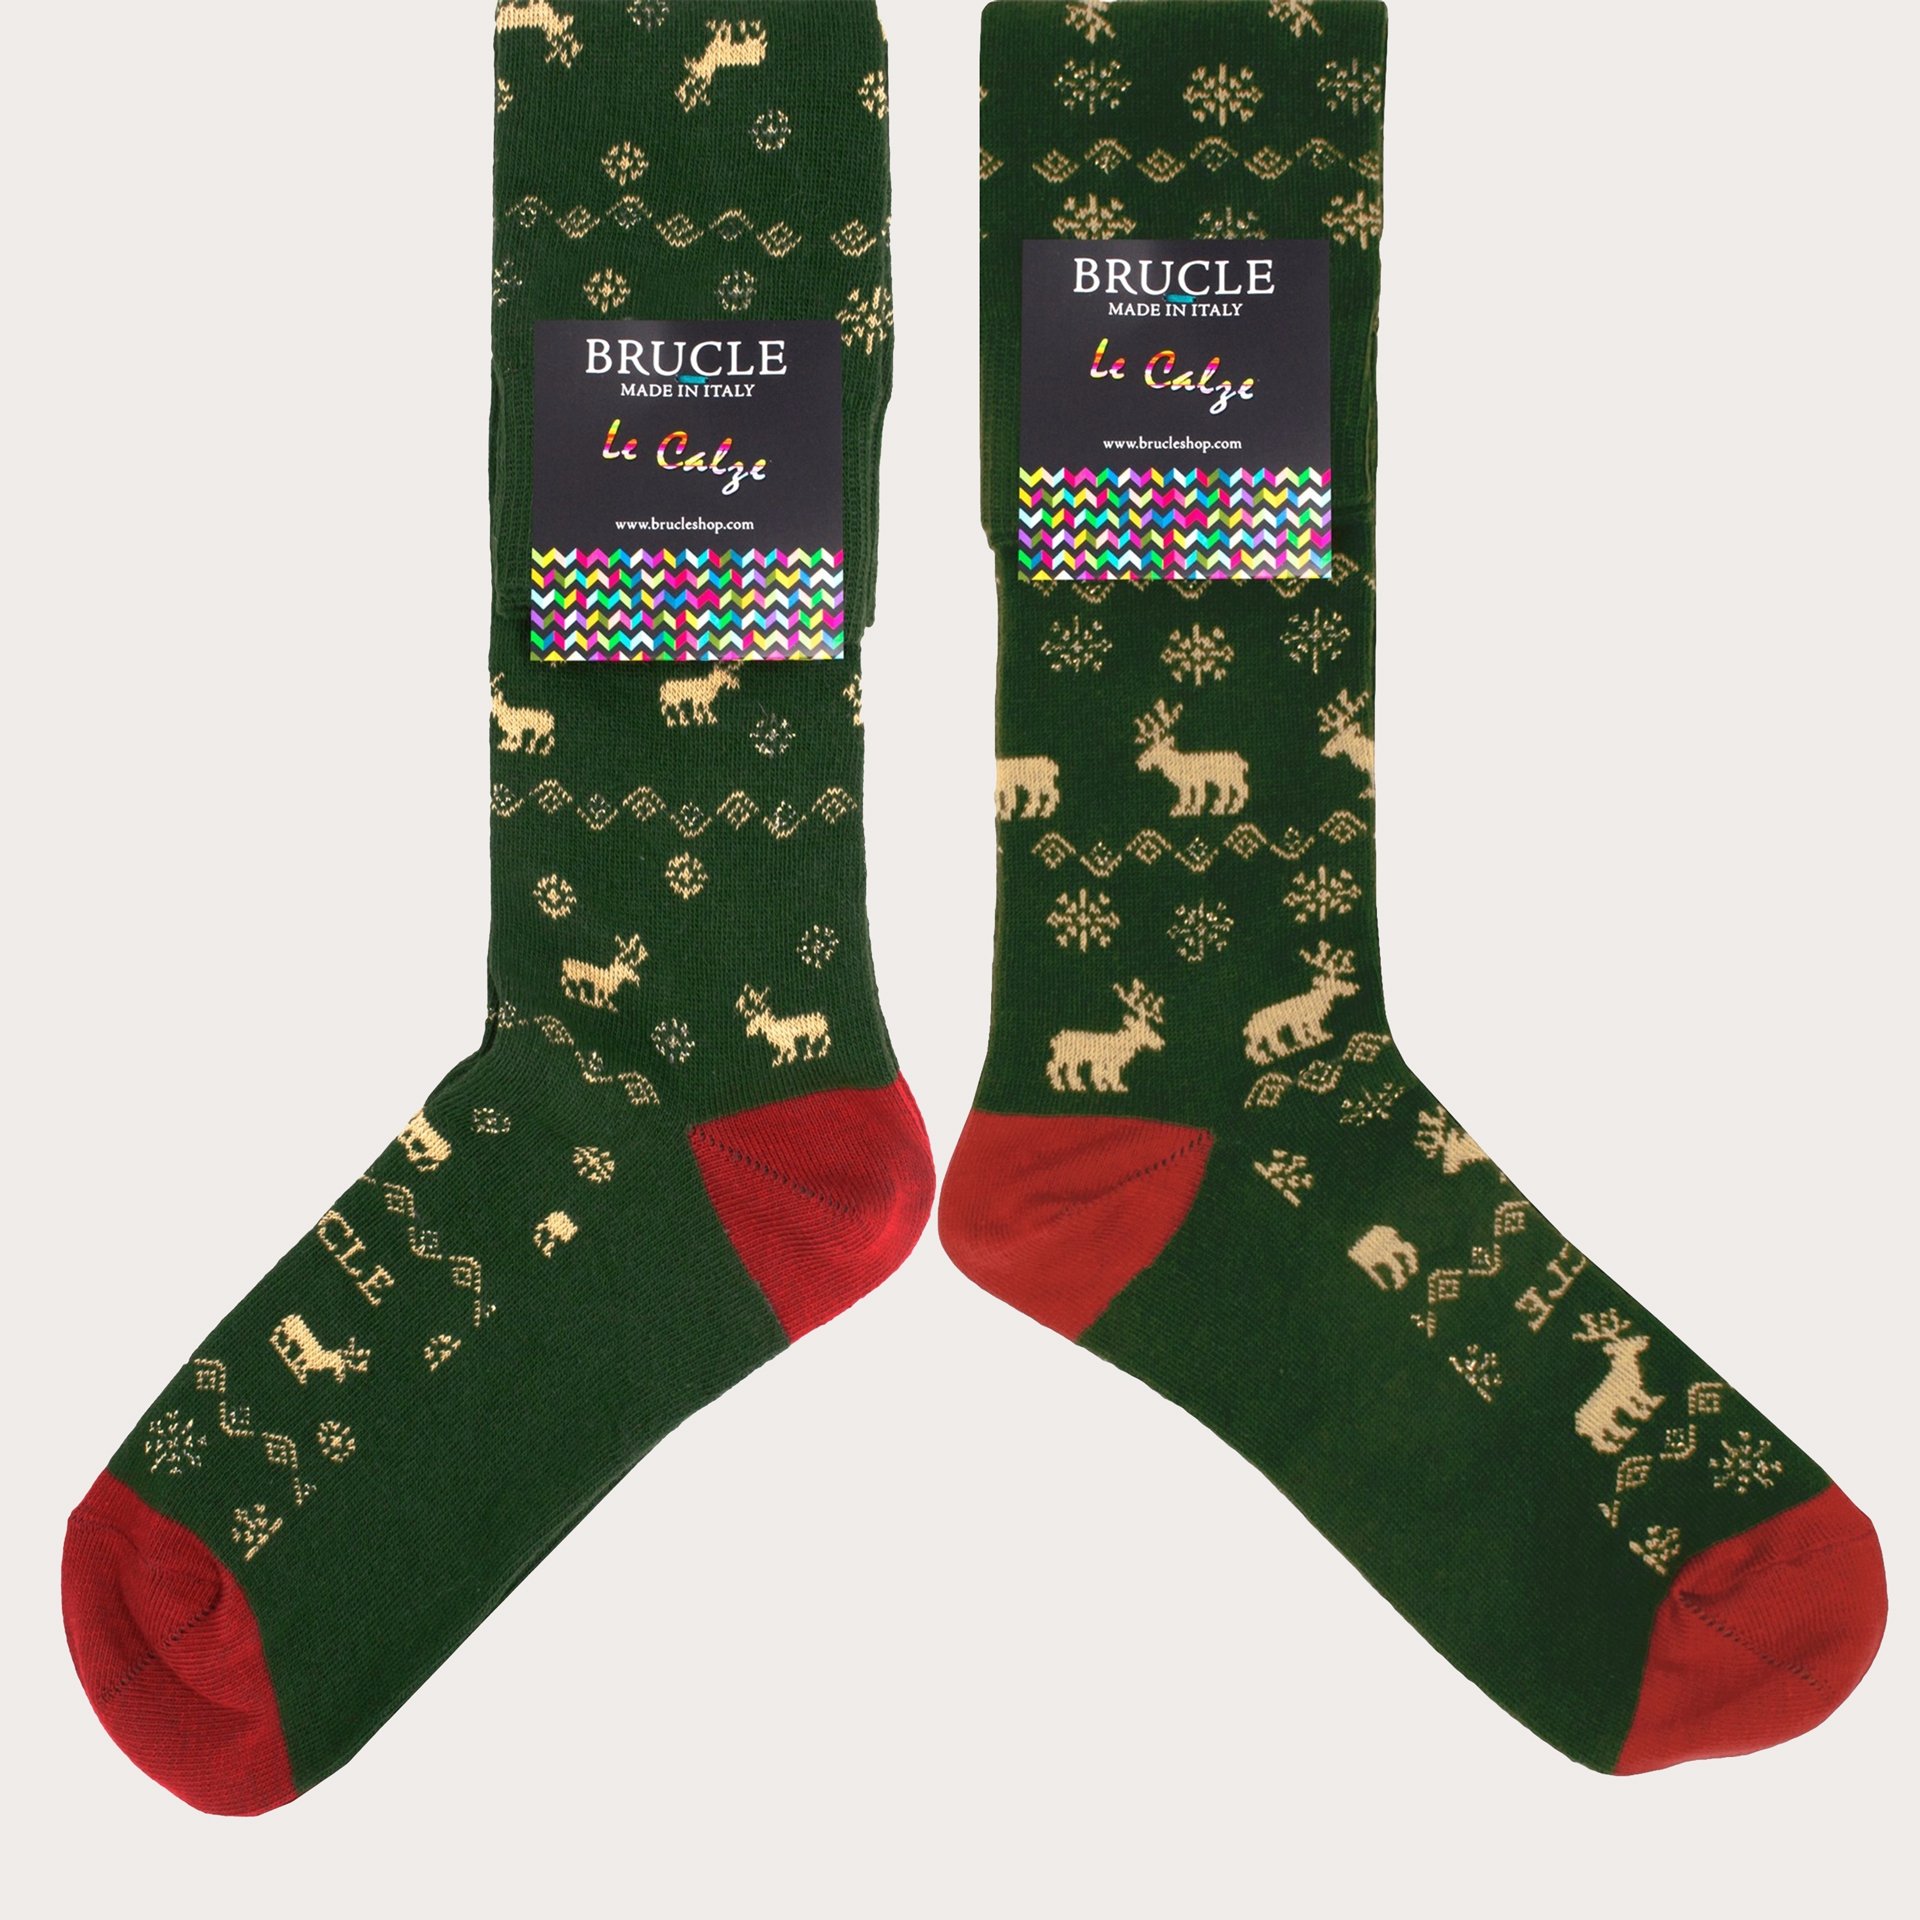 Warm socks, green and red reindeer pattern